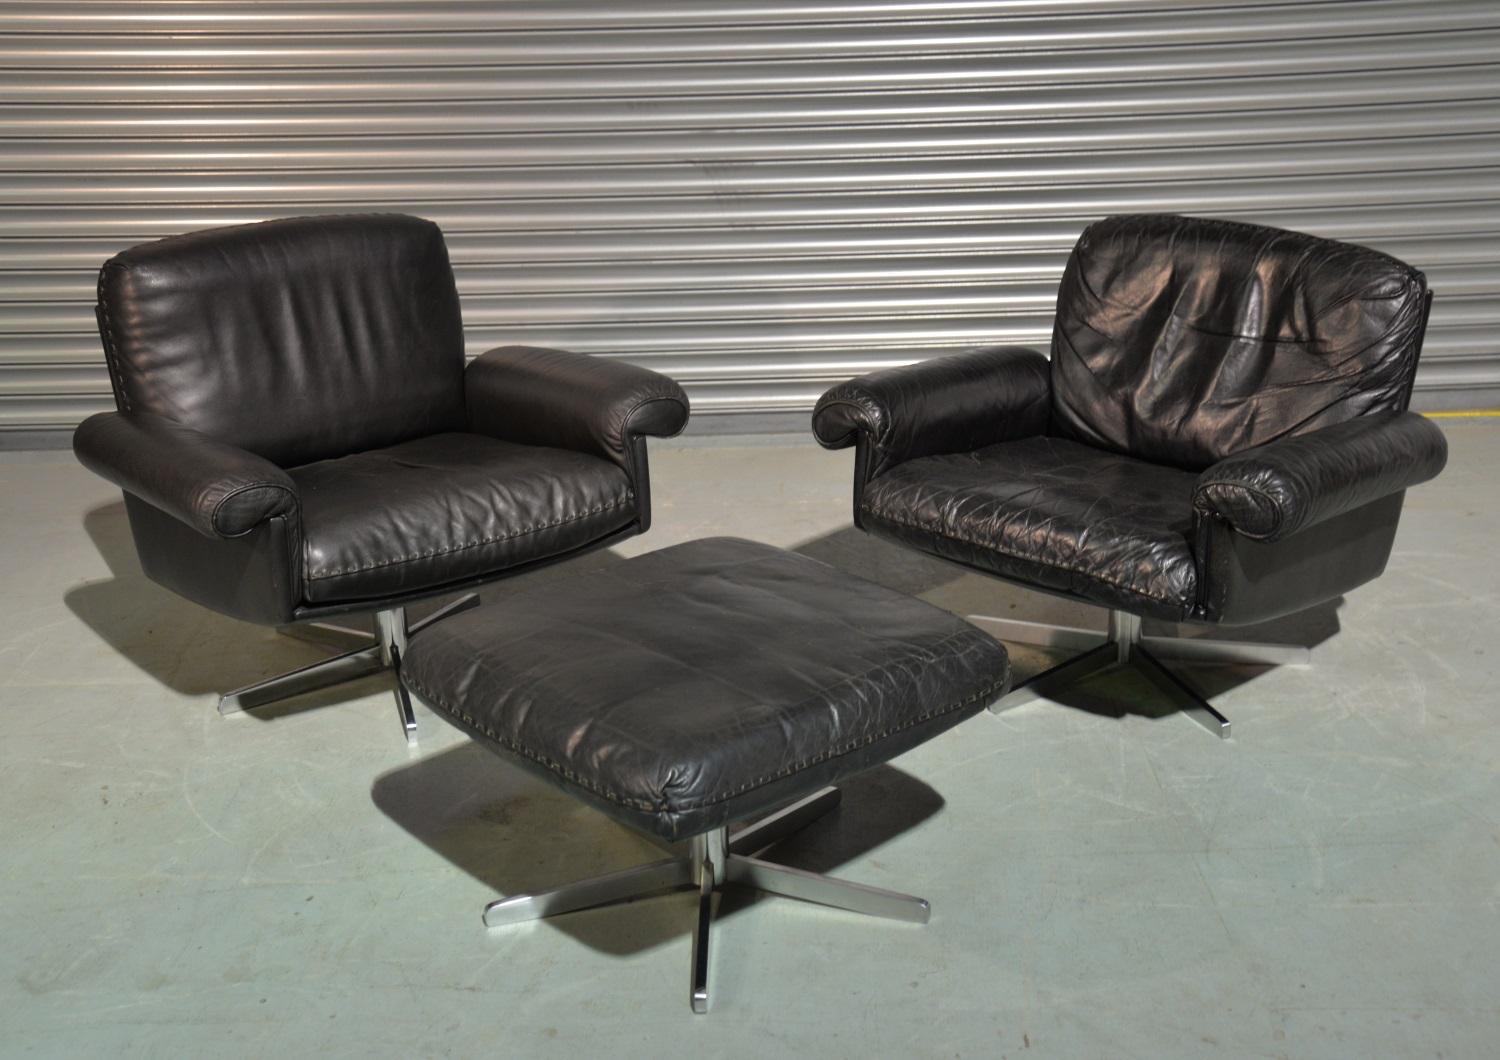 Discounted airfreight for our International customers ( from 2 weeks door to door ) 

We are delighted to bring to you a pair of ultra rare vintage 1970s de Sede DS 31 lounge armchairs and ottoman in stunning black aniline leather with superb